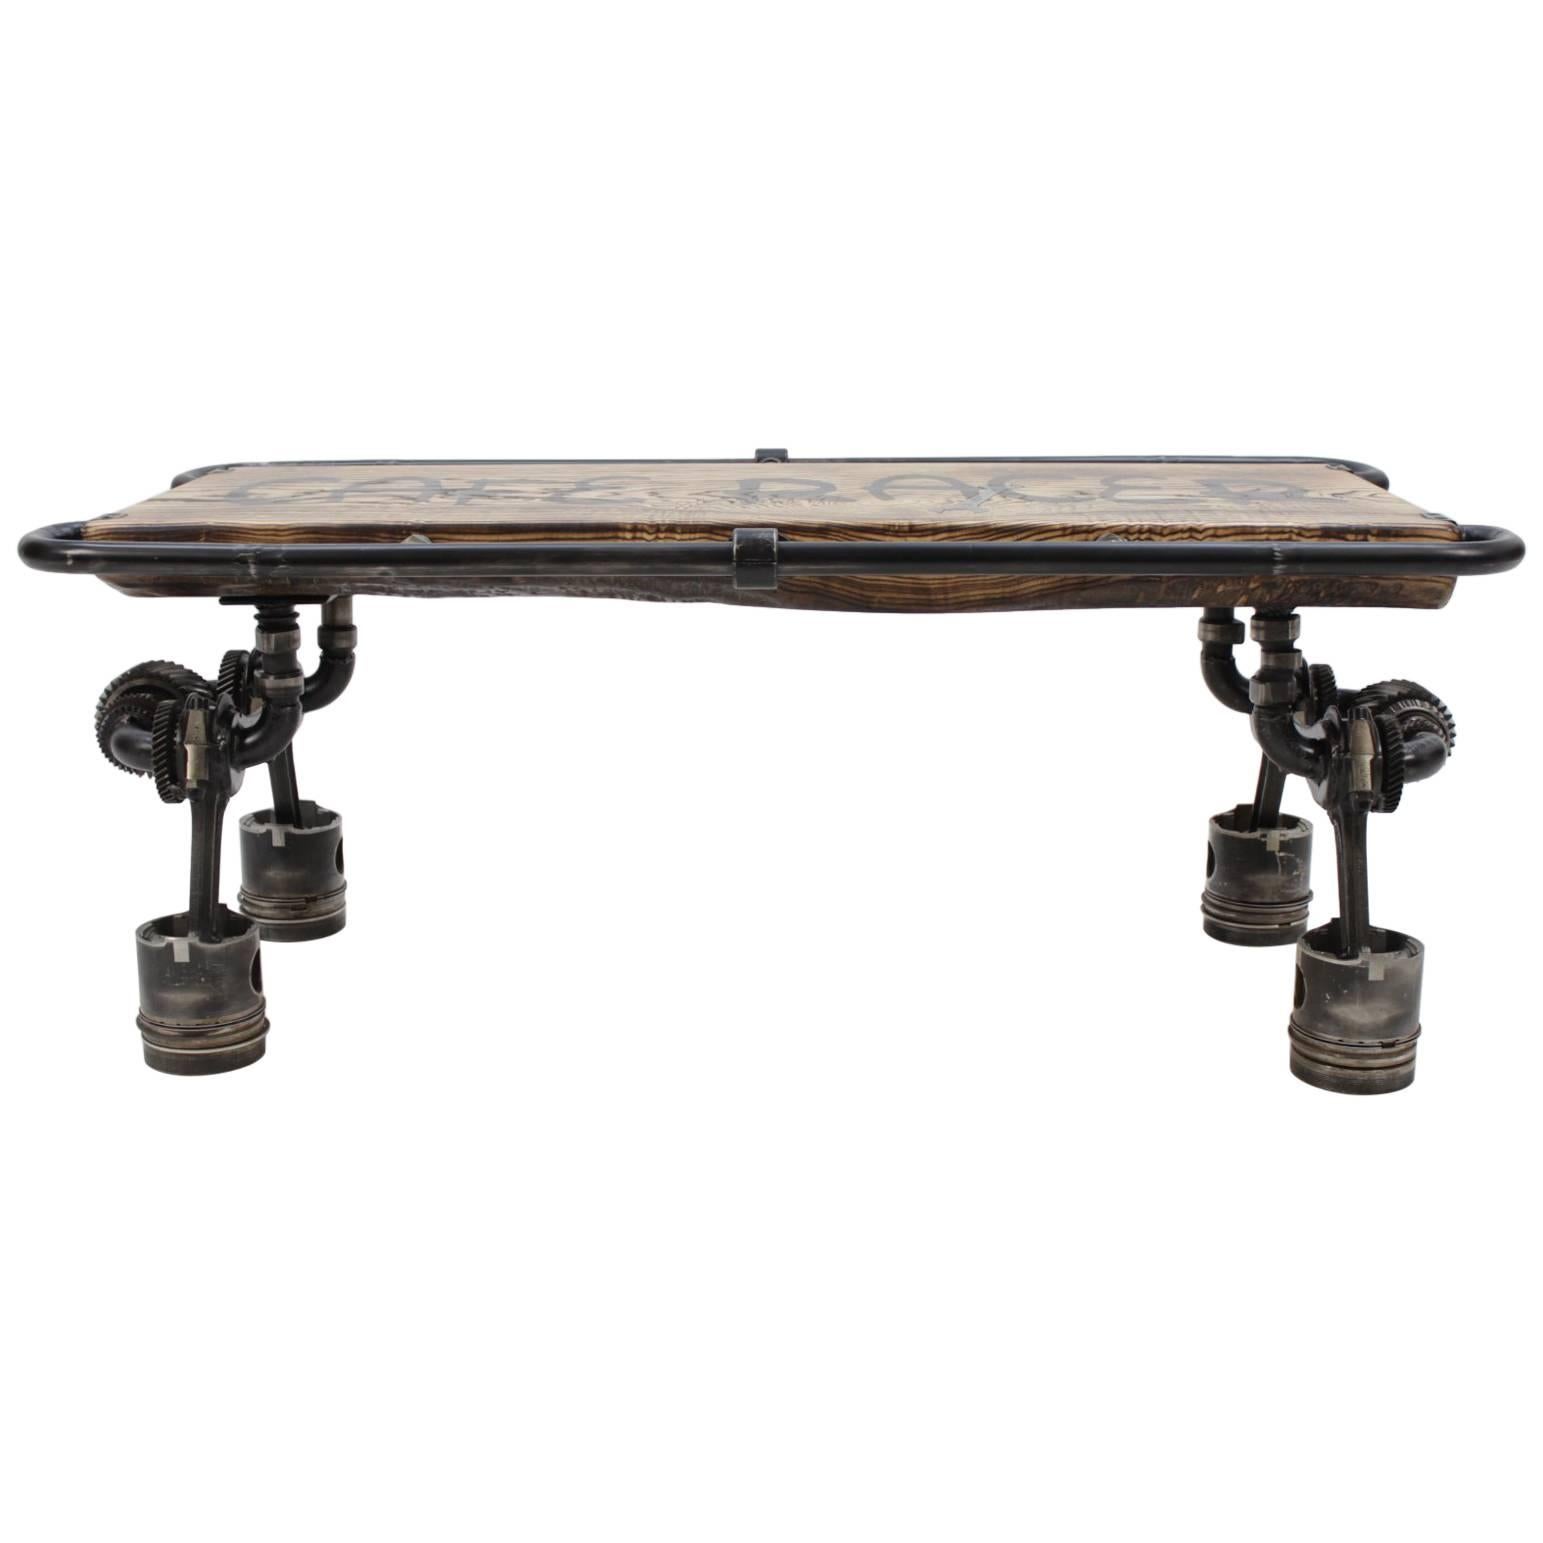 Contemporary Handmade Coffee "Cafe Racer" Table by Baldos For Sale